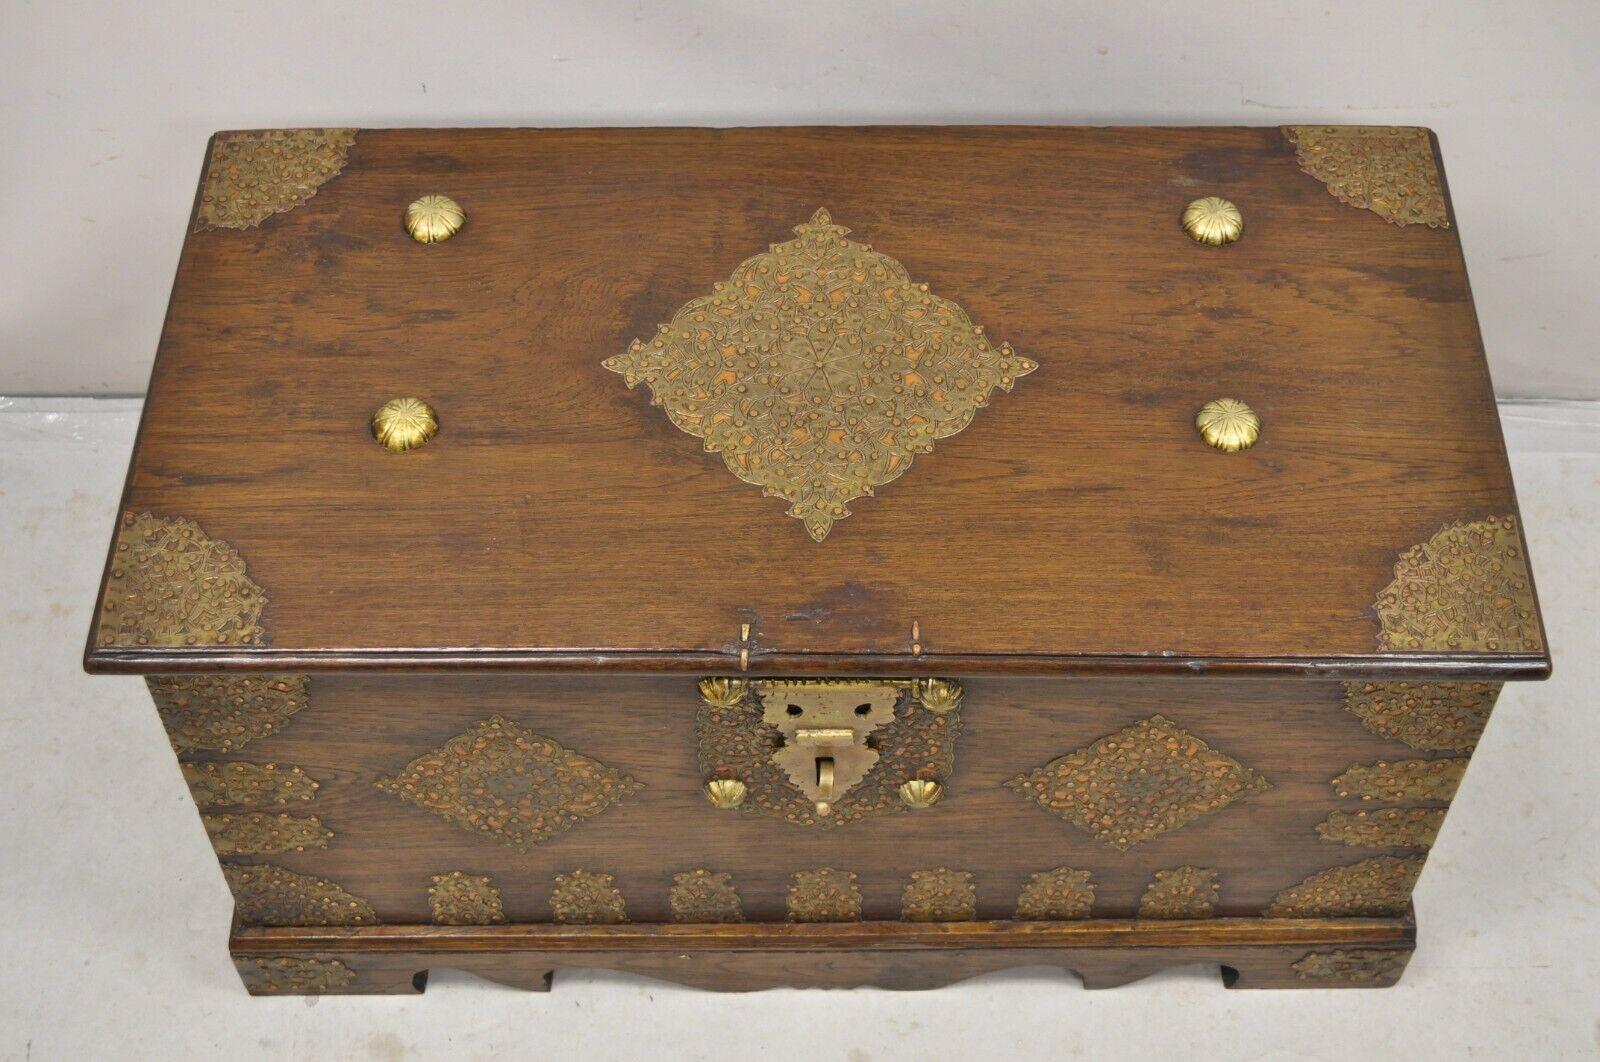 Islamic Antique Oak Wood & Brass Mounted Syrian Coffer Blanket Chest Trunk For Sale